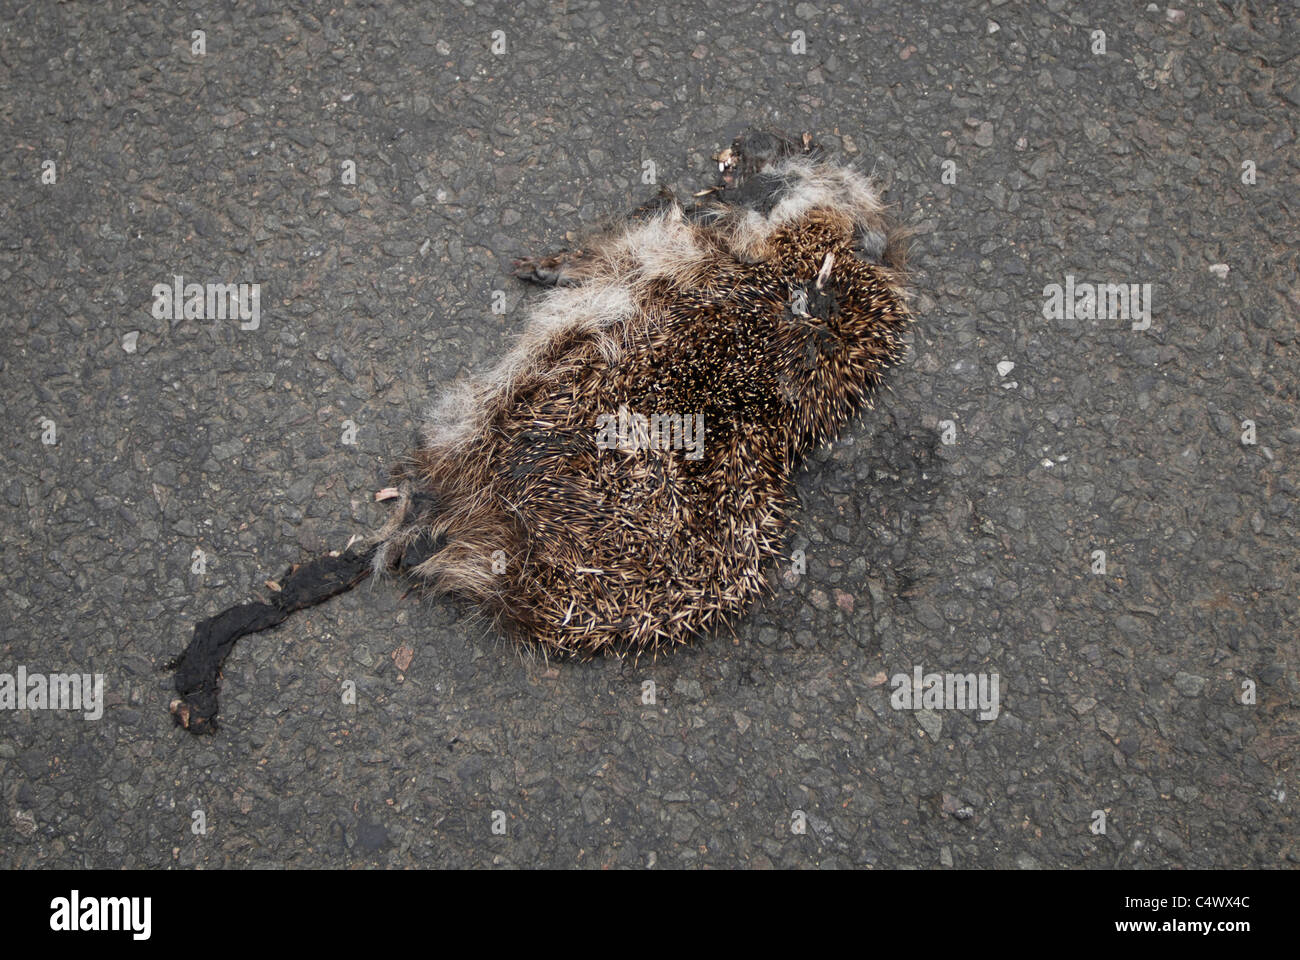 A roadkill hedgehog squashed on the road at Camelford, Cornwall. Freeganism story for The Telegraph. Stock Photo